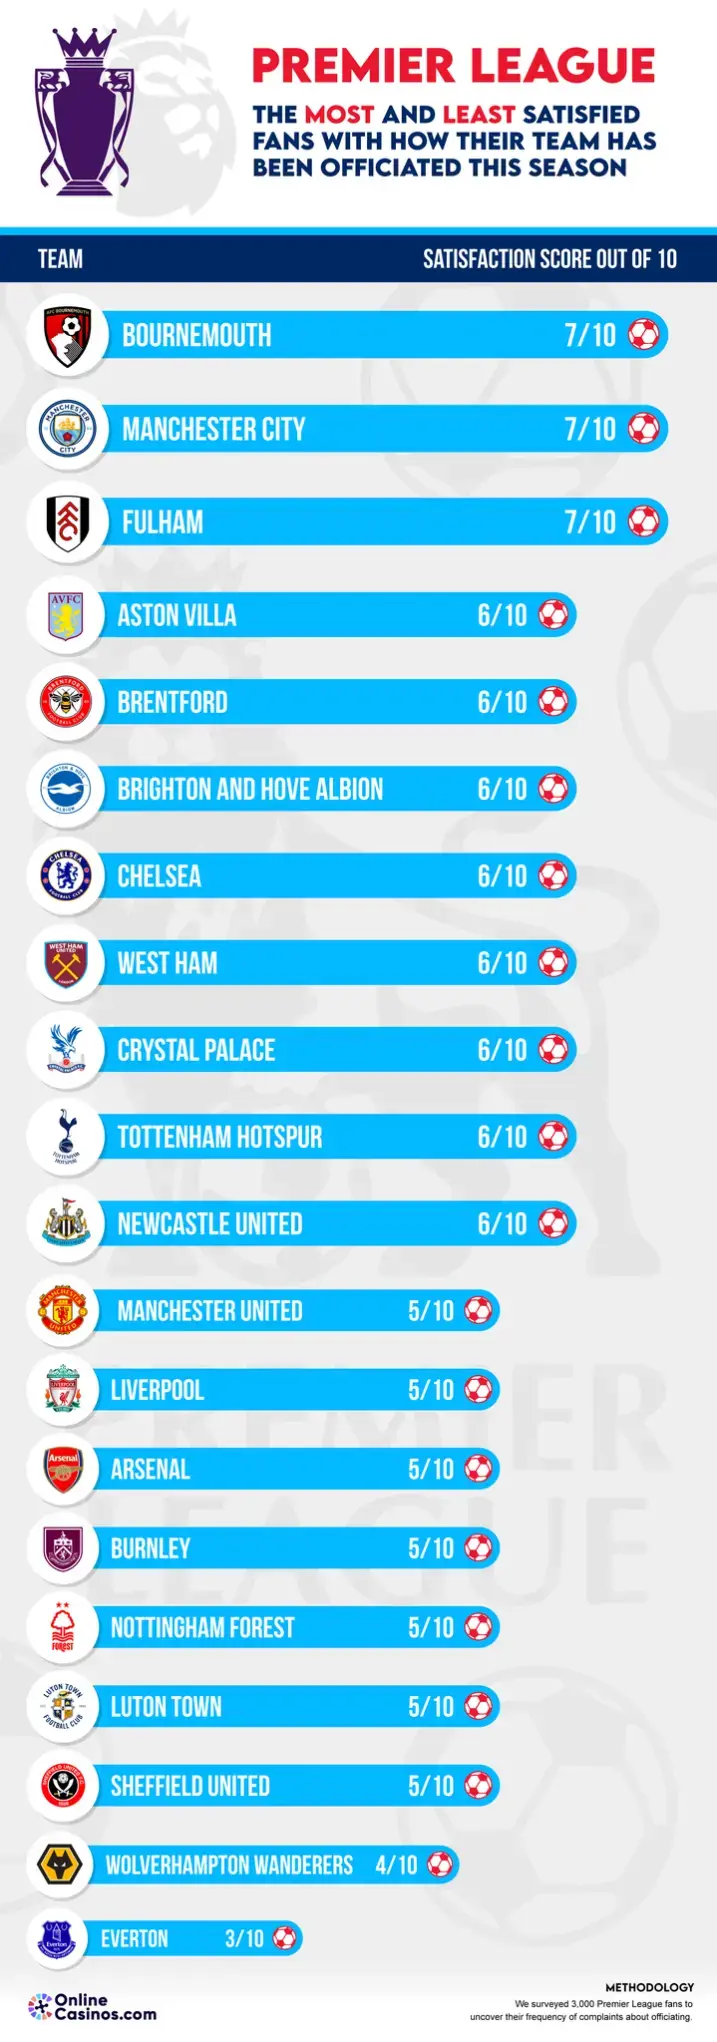 Premier League The Most And Least Satisfied Fans With How Their Team Has Been Officiated This Season